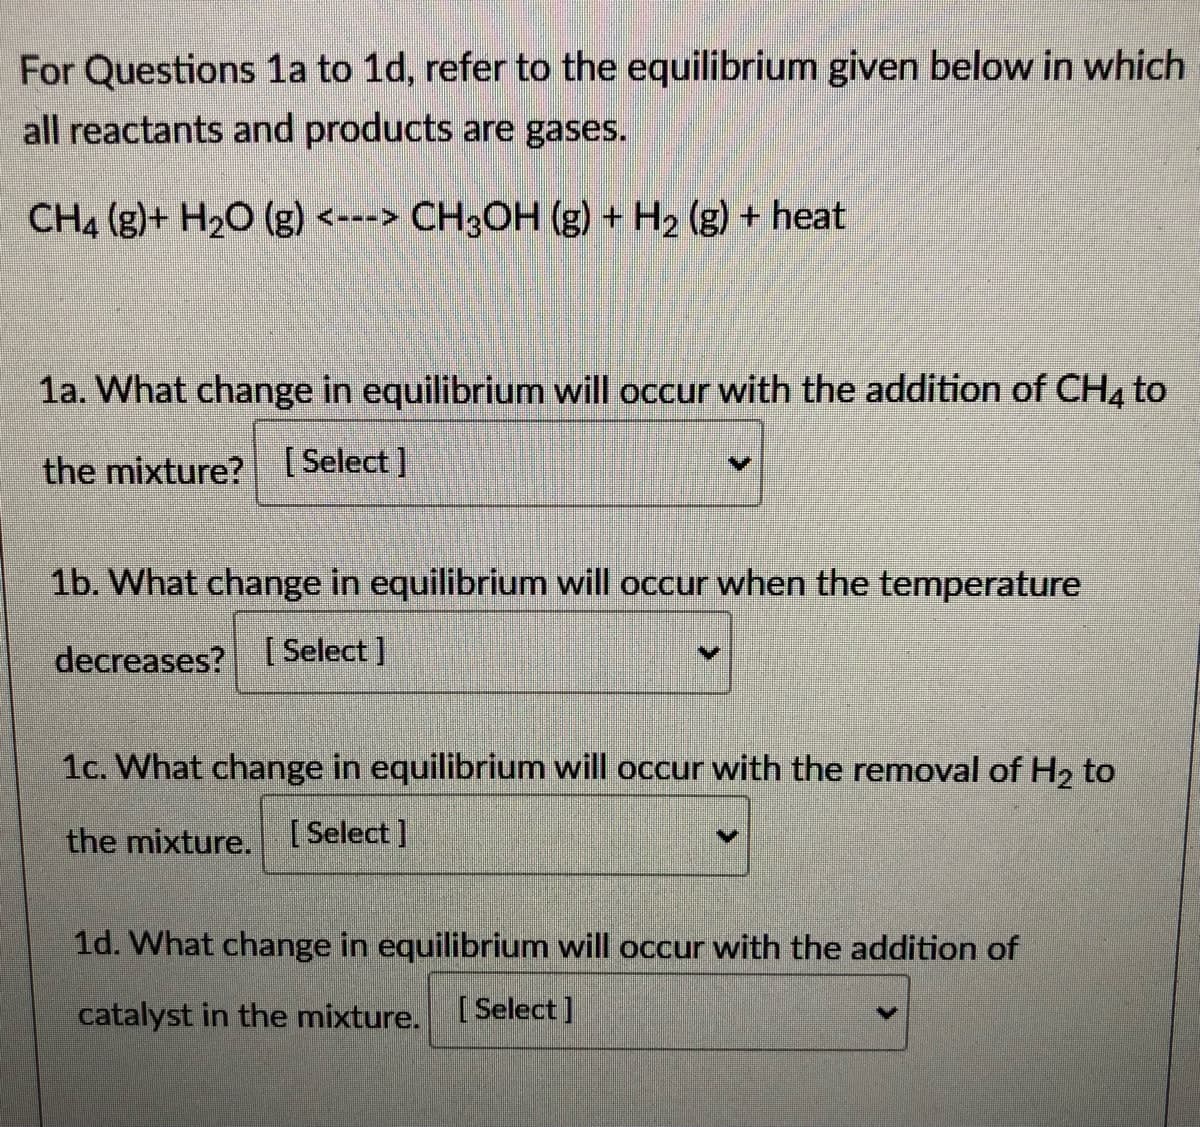 For Questions 1a to 1d, refer to the equilibrium given below in which
all reactants and products are gases.
CH4 (g)+ H20 (g) <---> CH3OH (g) + H2 (g) + heat
1a. What change in equilibrium will occur with the addition of CH4 to
the mixture? [Select ]
1b. What change in equilibrium will occur when the temperature
decreases? [ Select]
1c. What change in equilibrium will occur with the removal of H2 to
the mixture.
[ Select ]
1d. What change in equilibrium will occur with the addition of
catalyst in the mixture.
[ Select]
